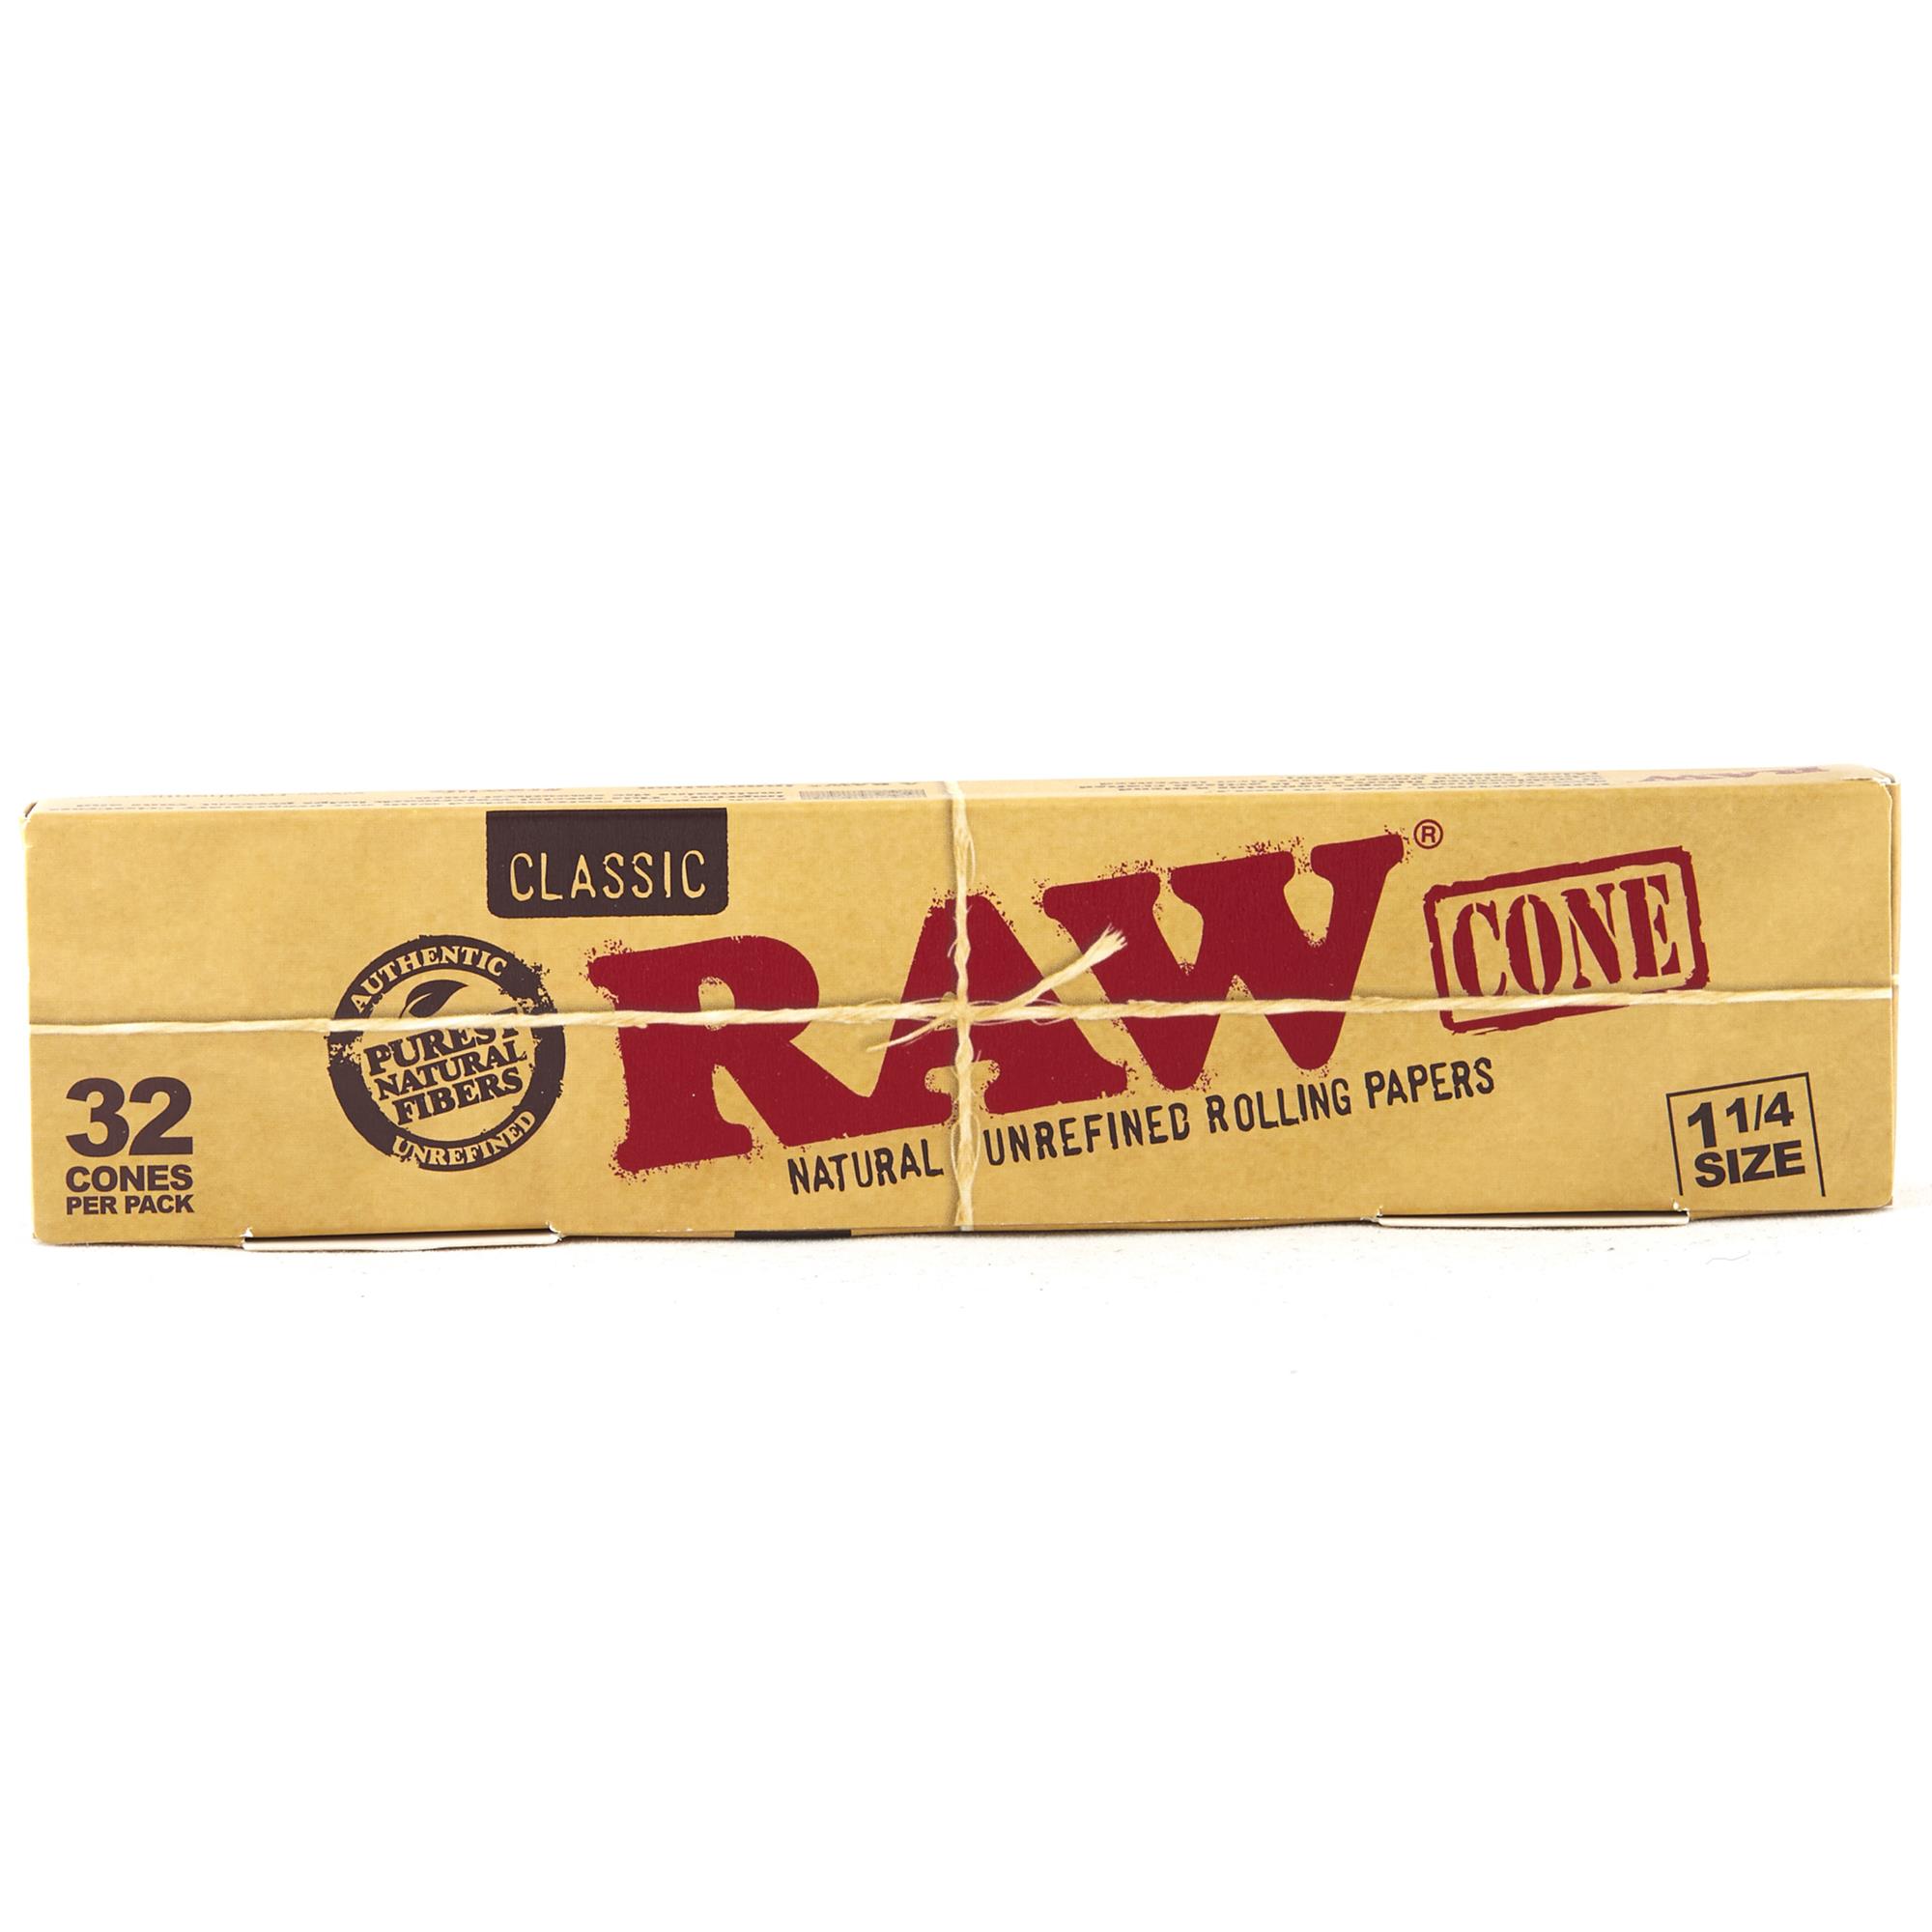 RAW PRE-ROLLED 1/4 CONES